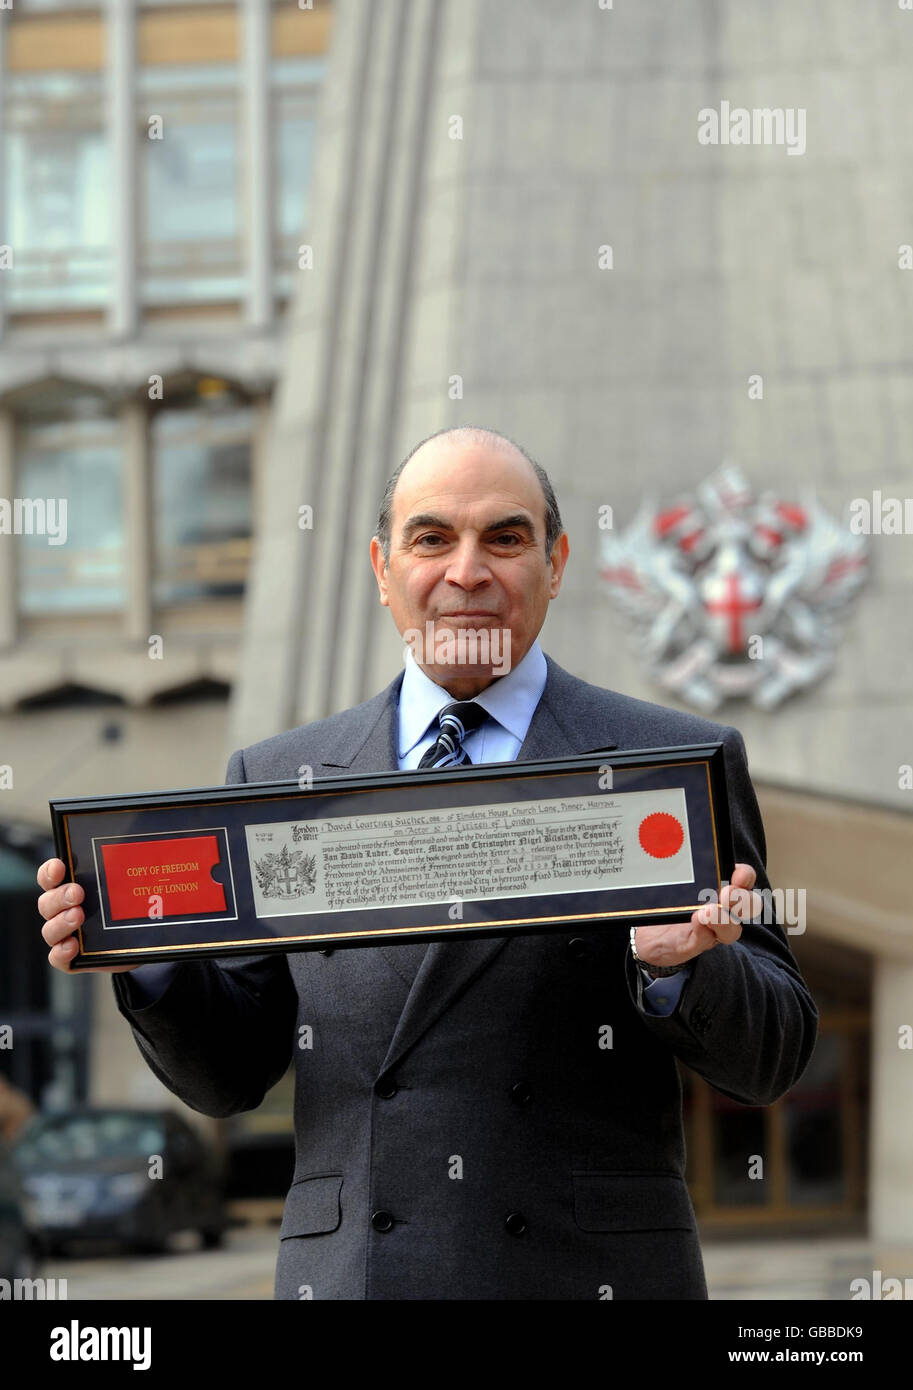 David Suchet receives the Freedom of the City of London. Actor David Suchet receives the Freedom of the City of London at the Guildhall in east London. Stock Photo